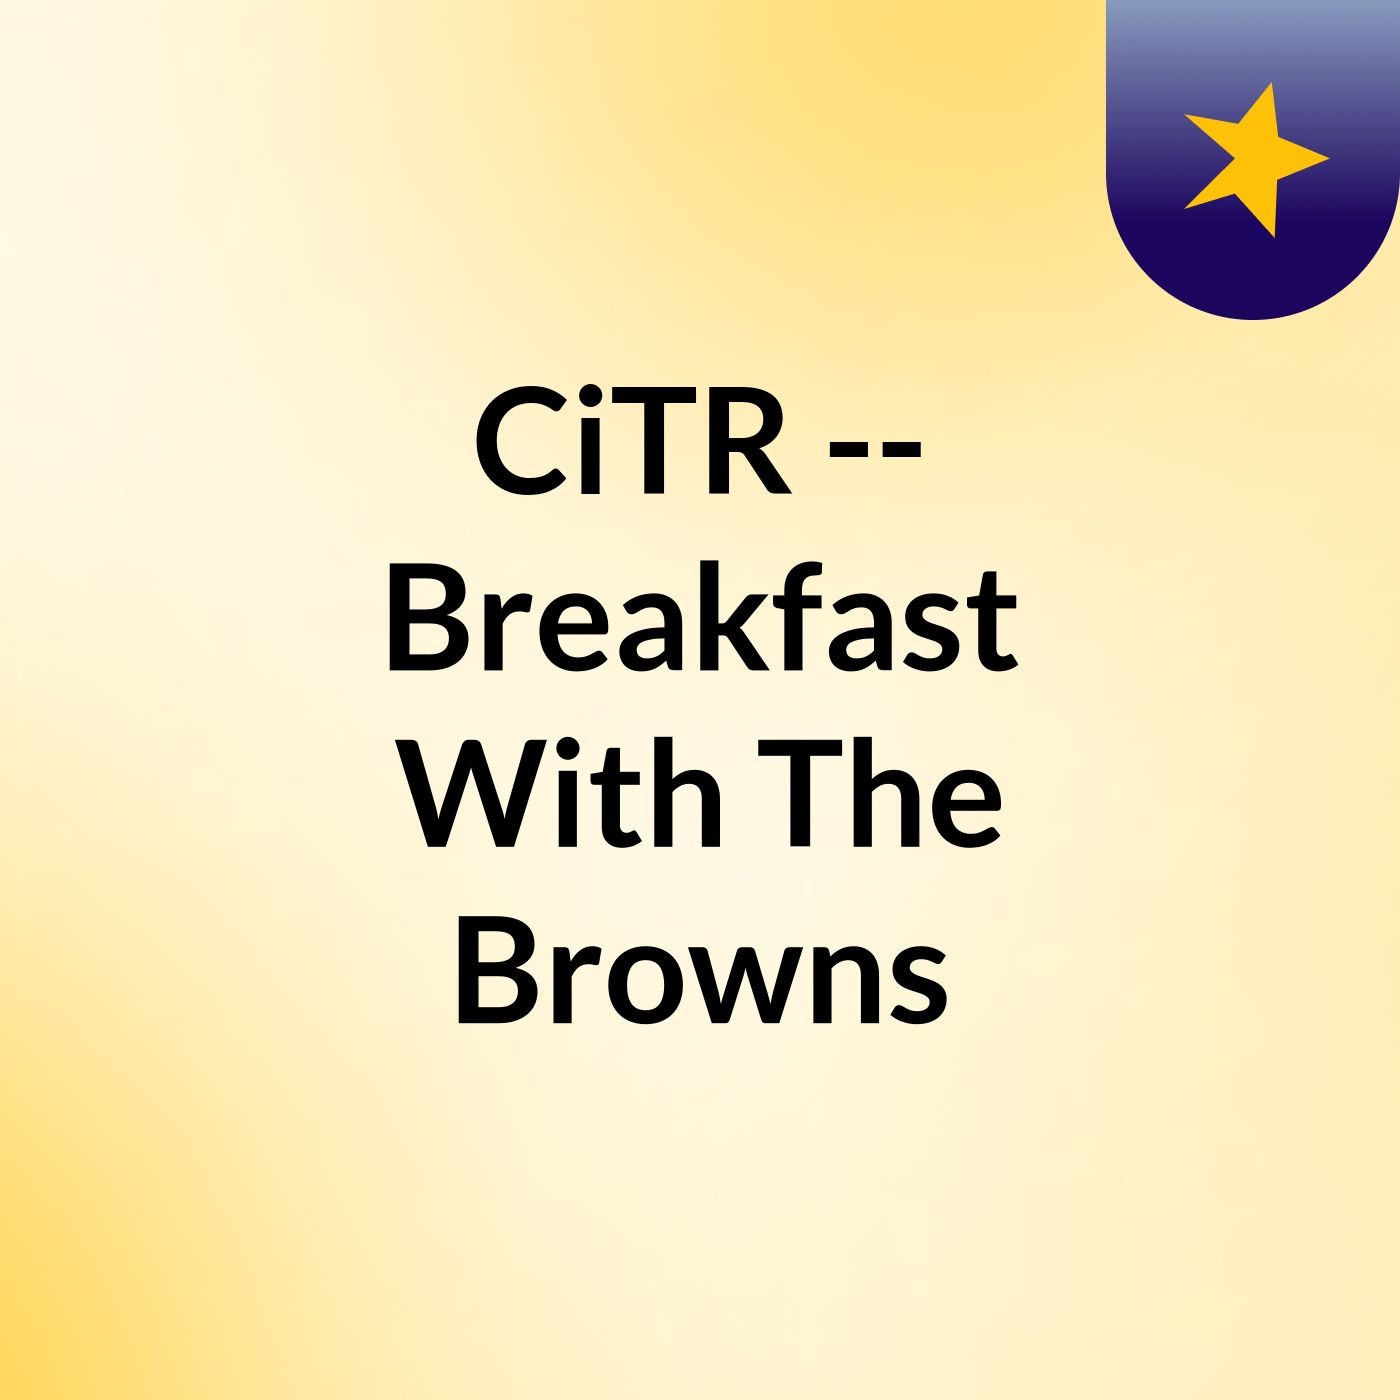 CiTR -- Breakfast With The Browns